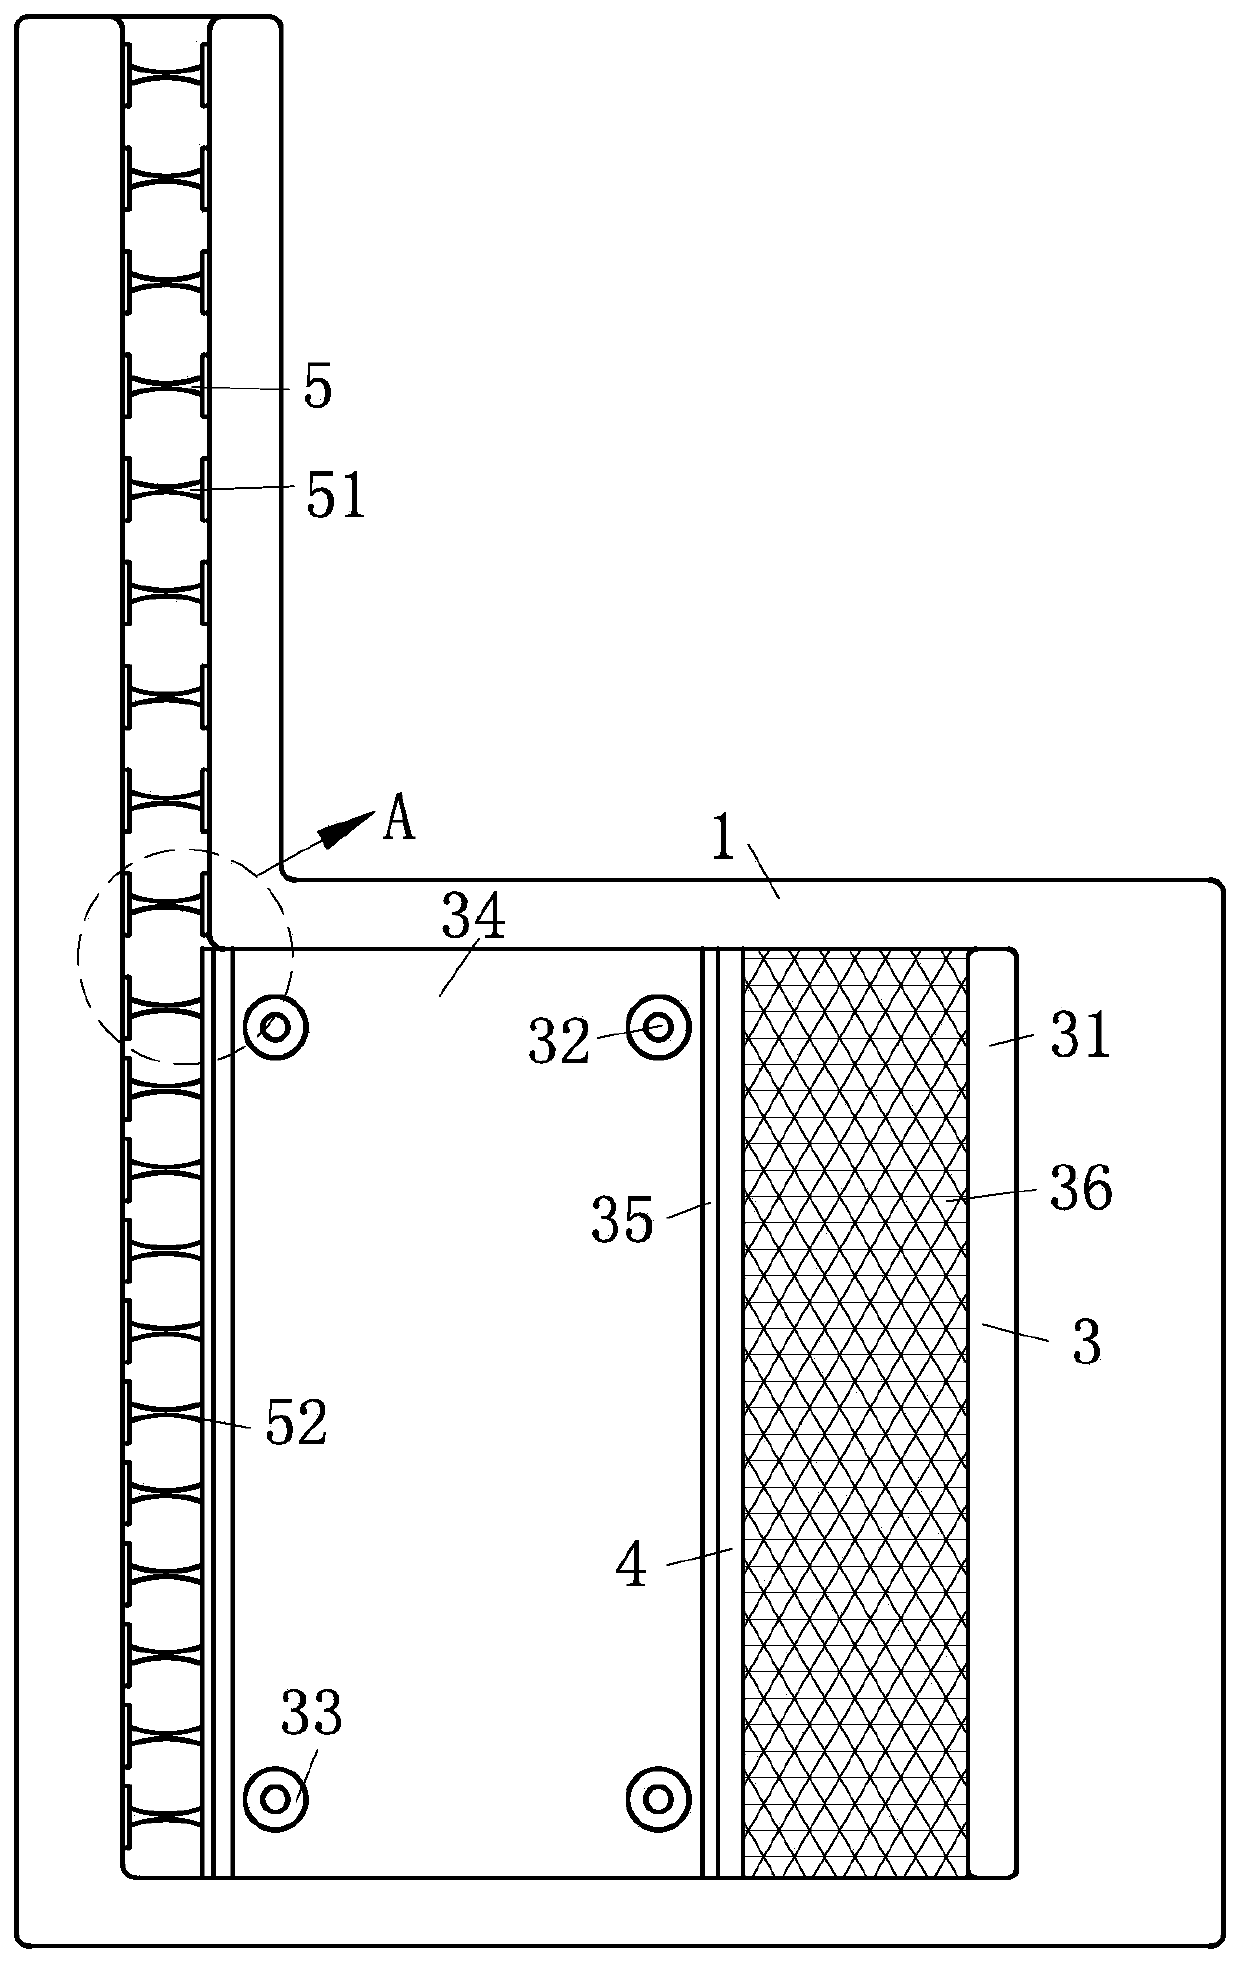 Feeding device of deformed steel bar quenching device with uniform quenching function